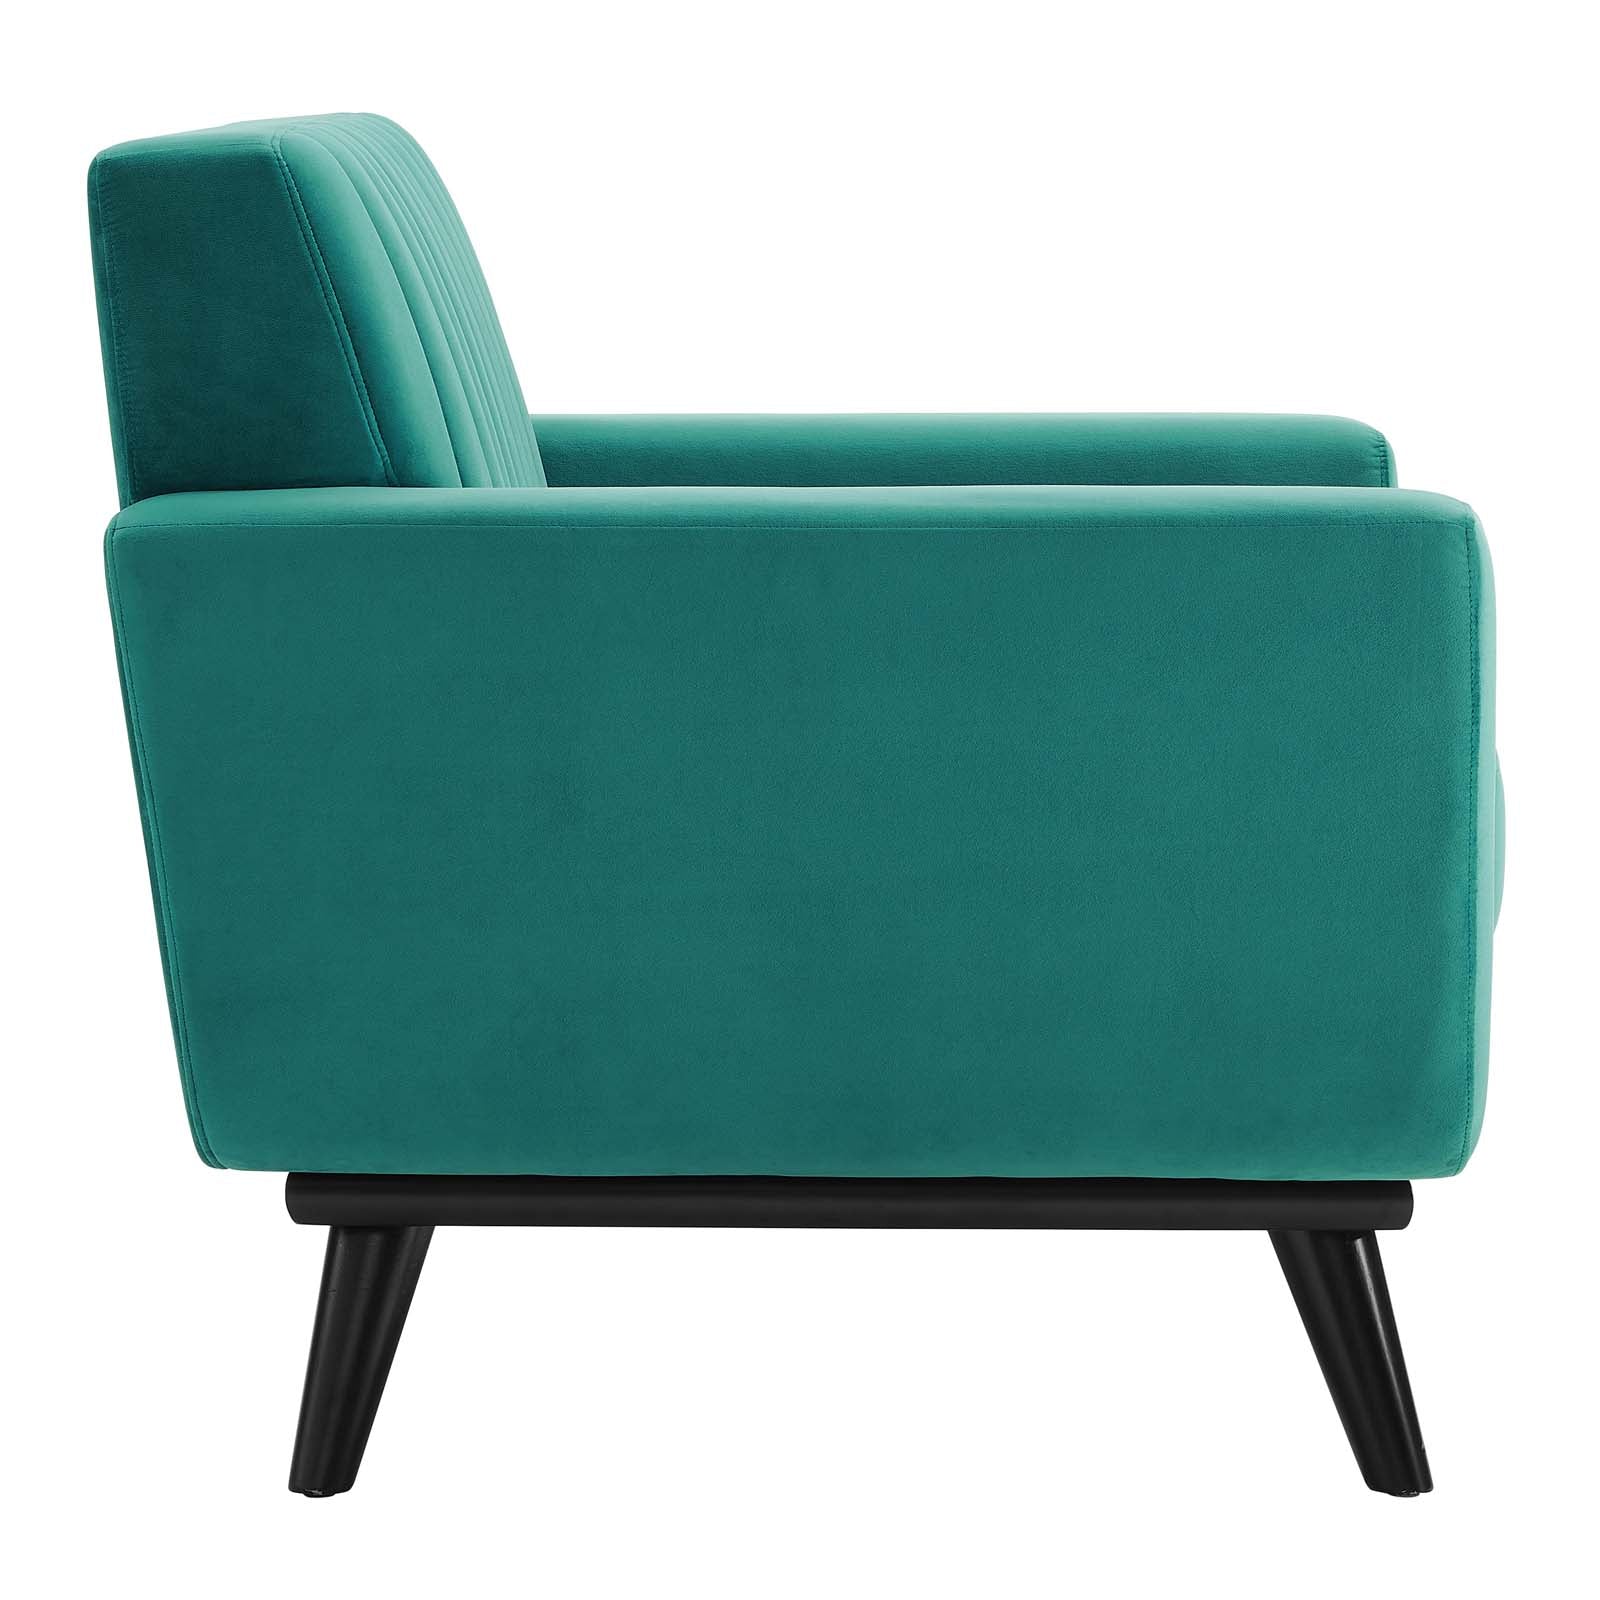 Modway Accent Chairs - Engage Channel Tufted Performance Velvet Armchair Teal